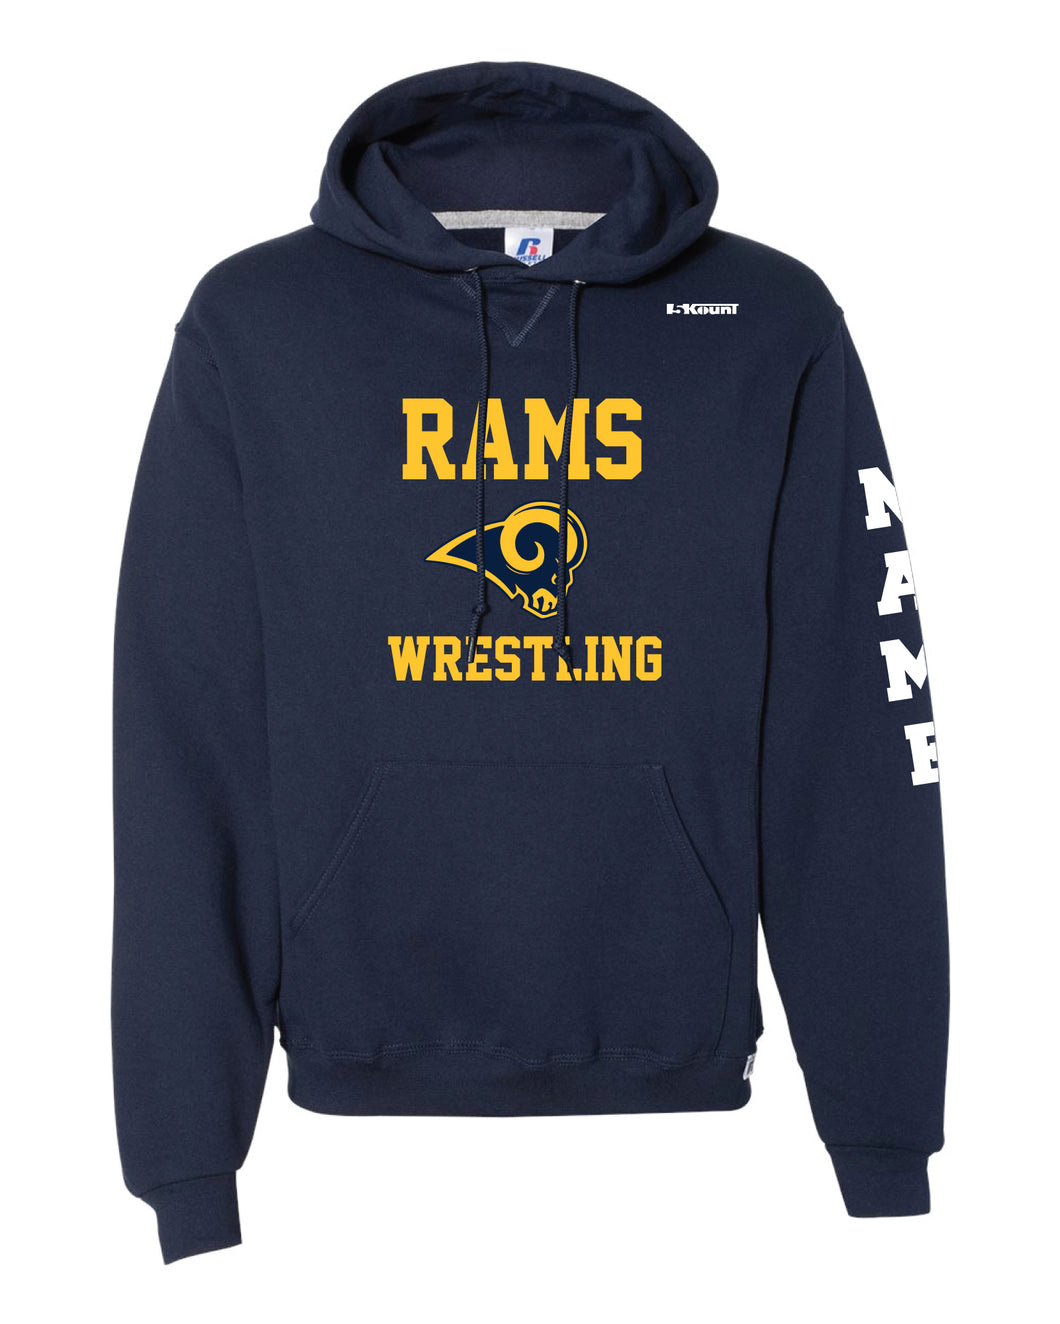 Del Val Wrestling Russell Athletic Cotton Hoodie - Navy - 5KounT2018